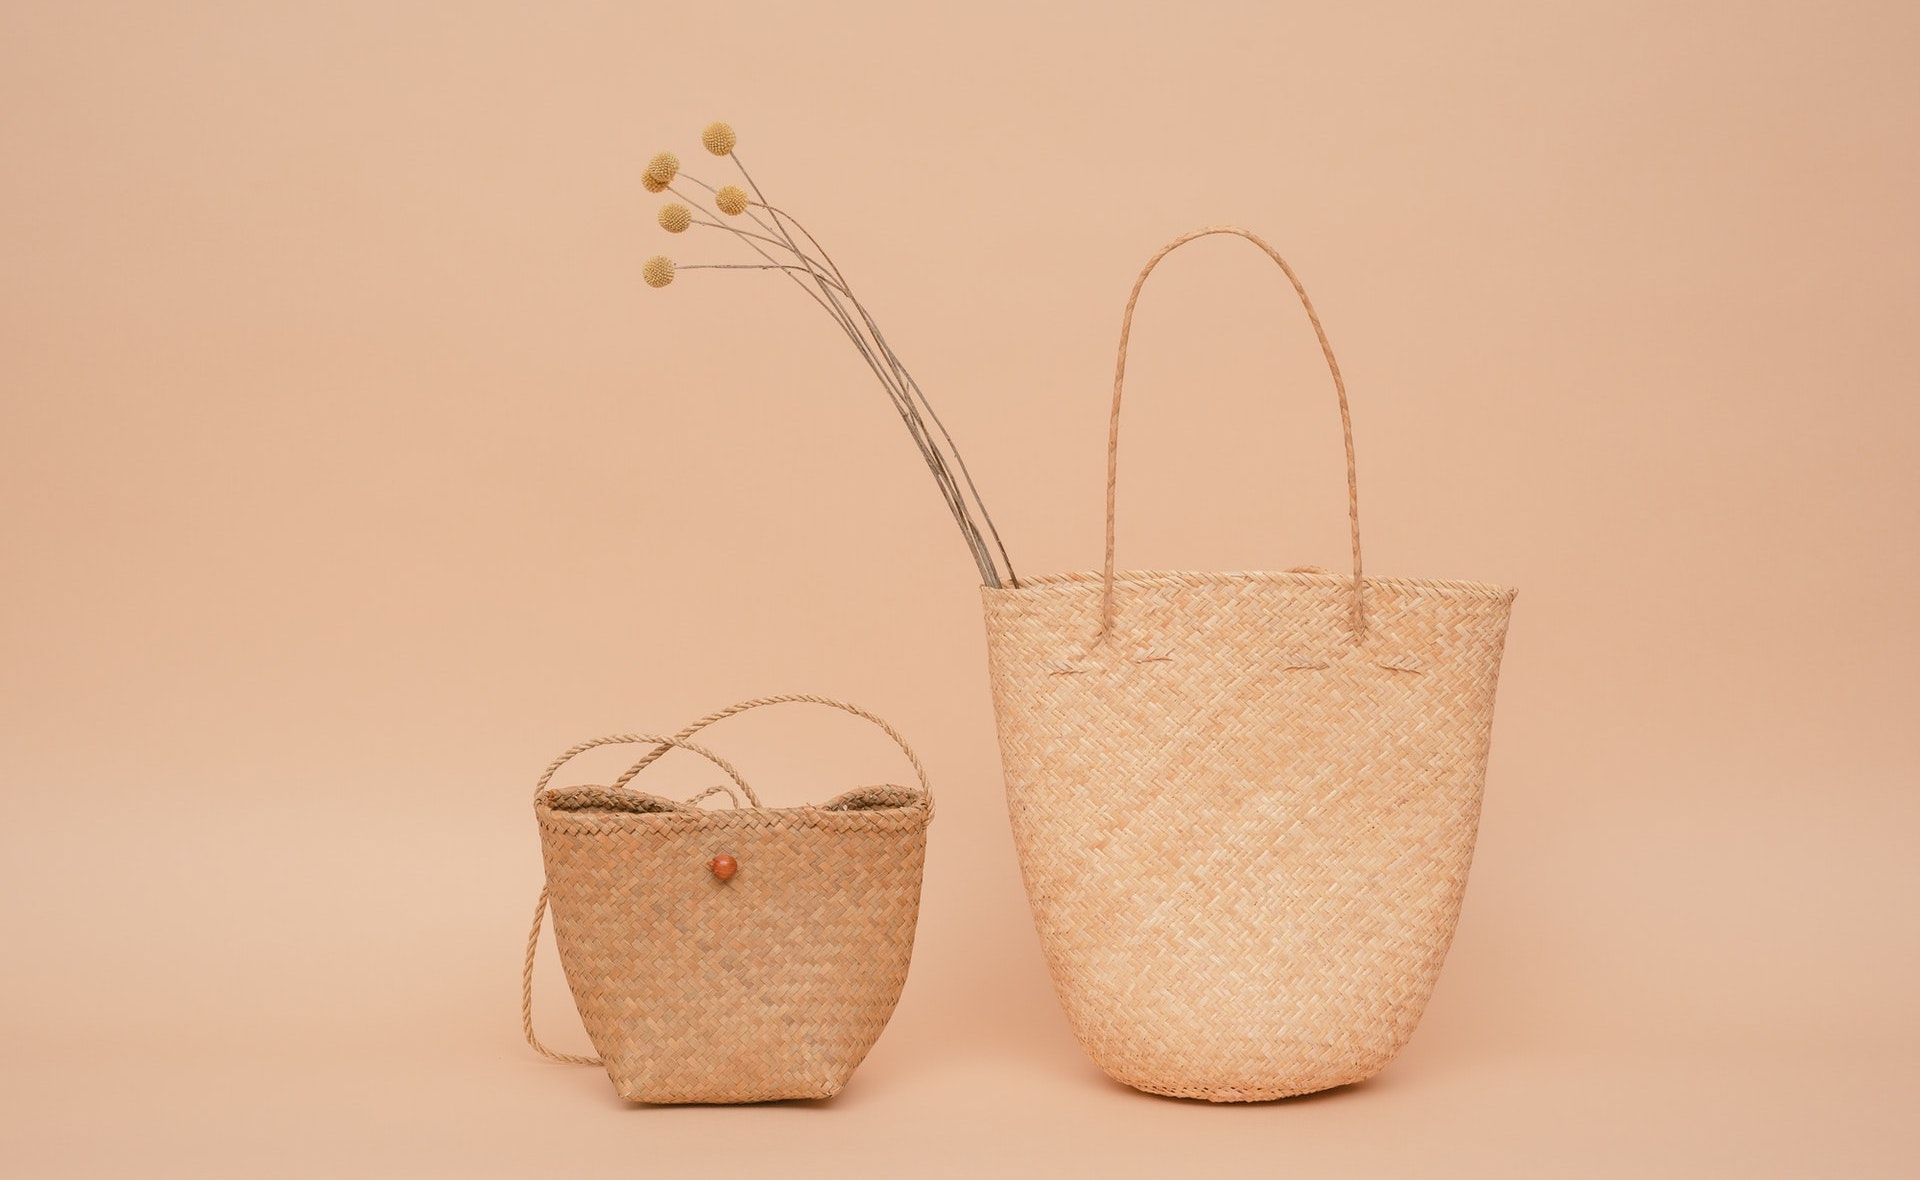 A photo of two woven flax baskest against a pink background